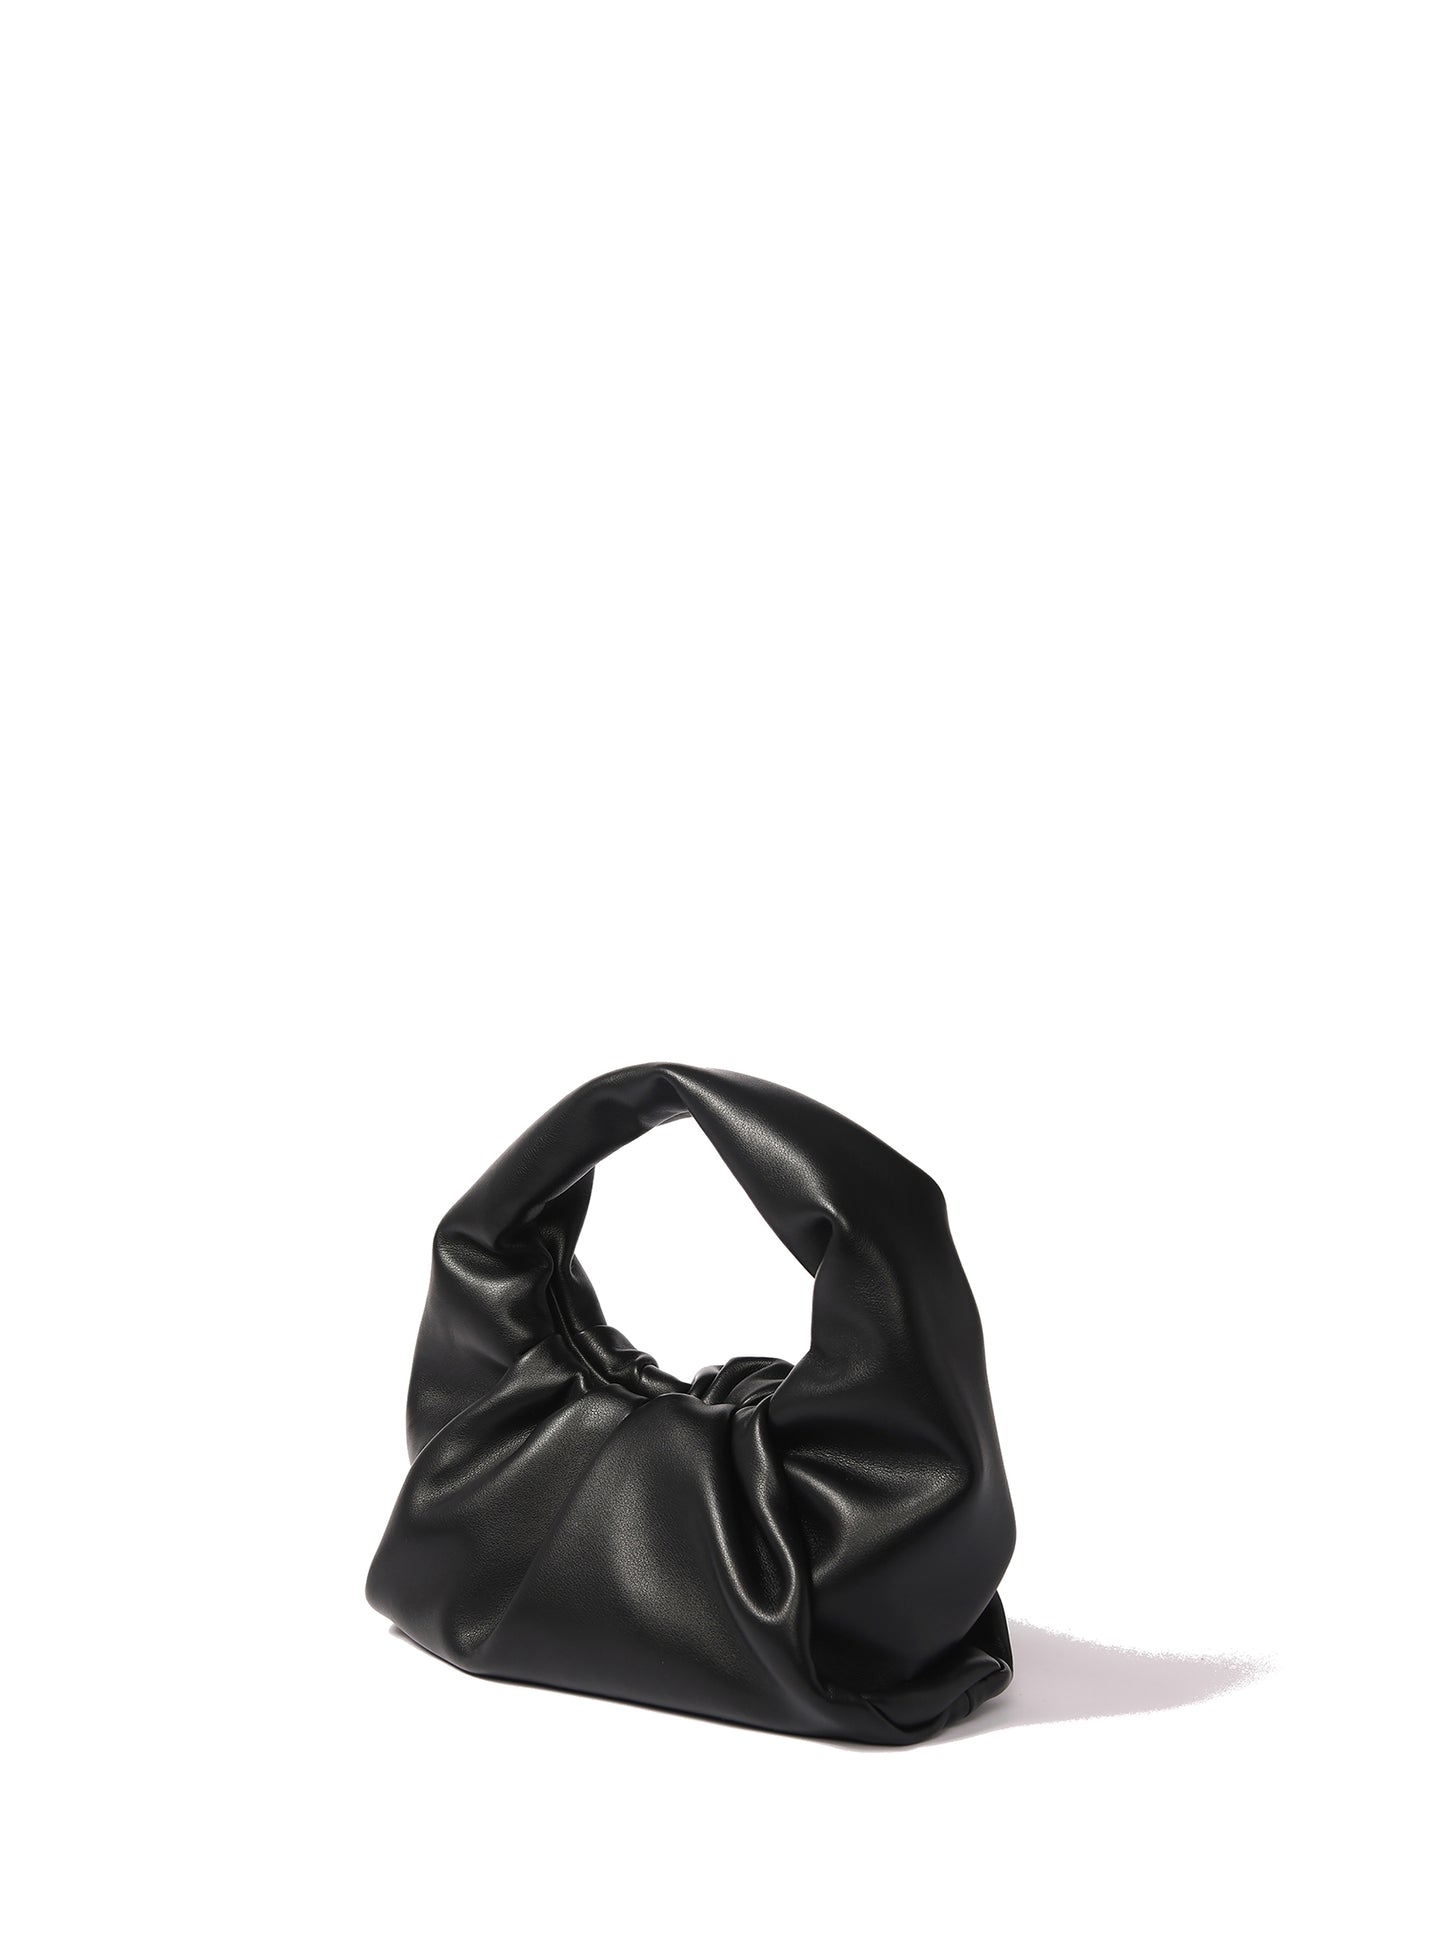 Marshmallow Croissant Bag in Soft Leather, Black